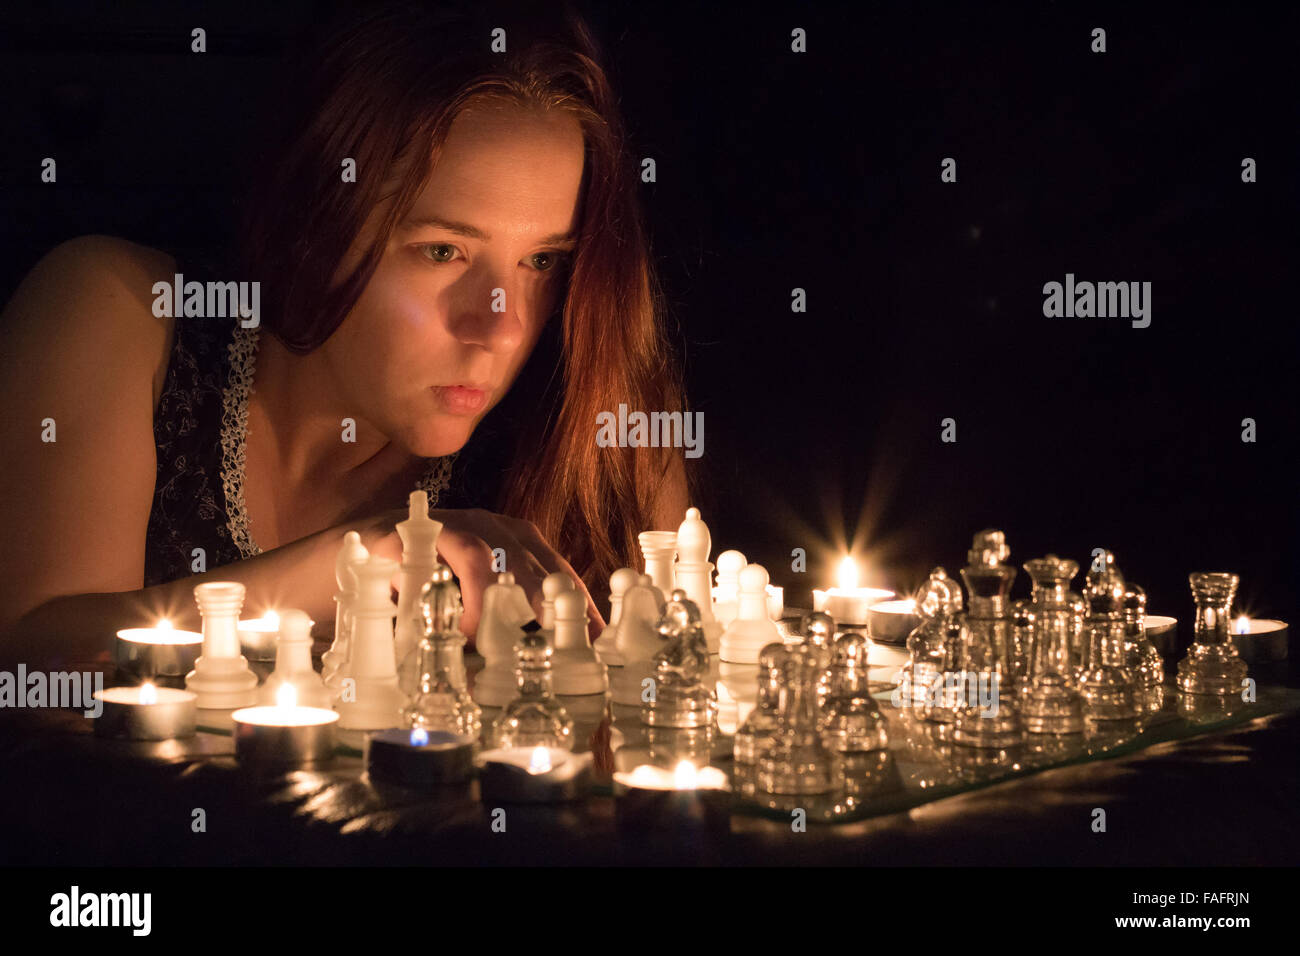 Woman playing chess by candlelight. Stock Photo